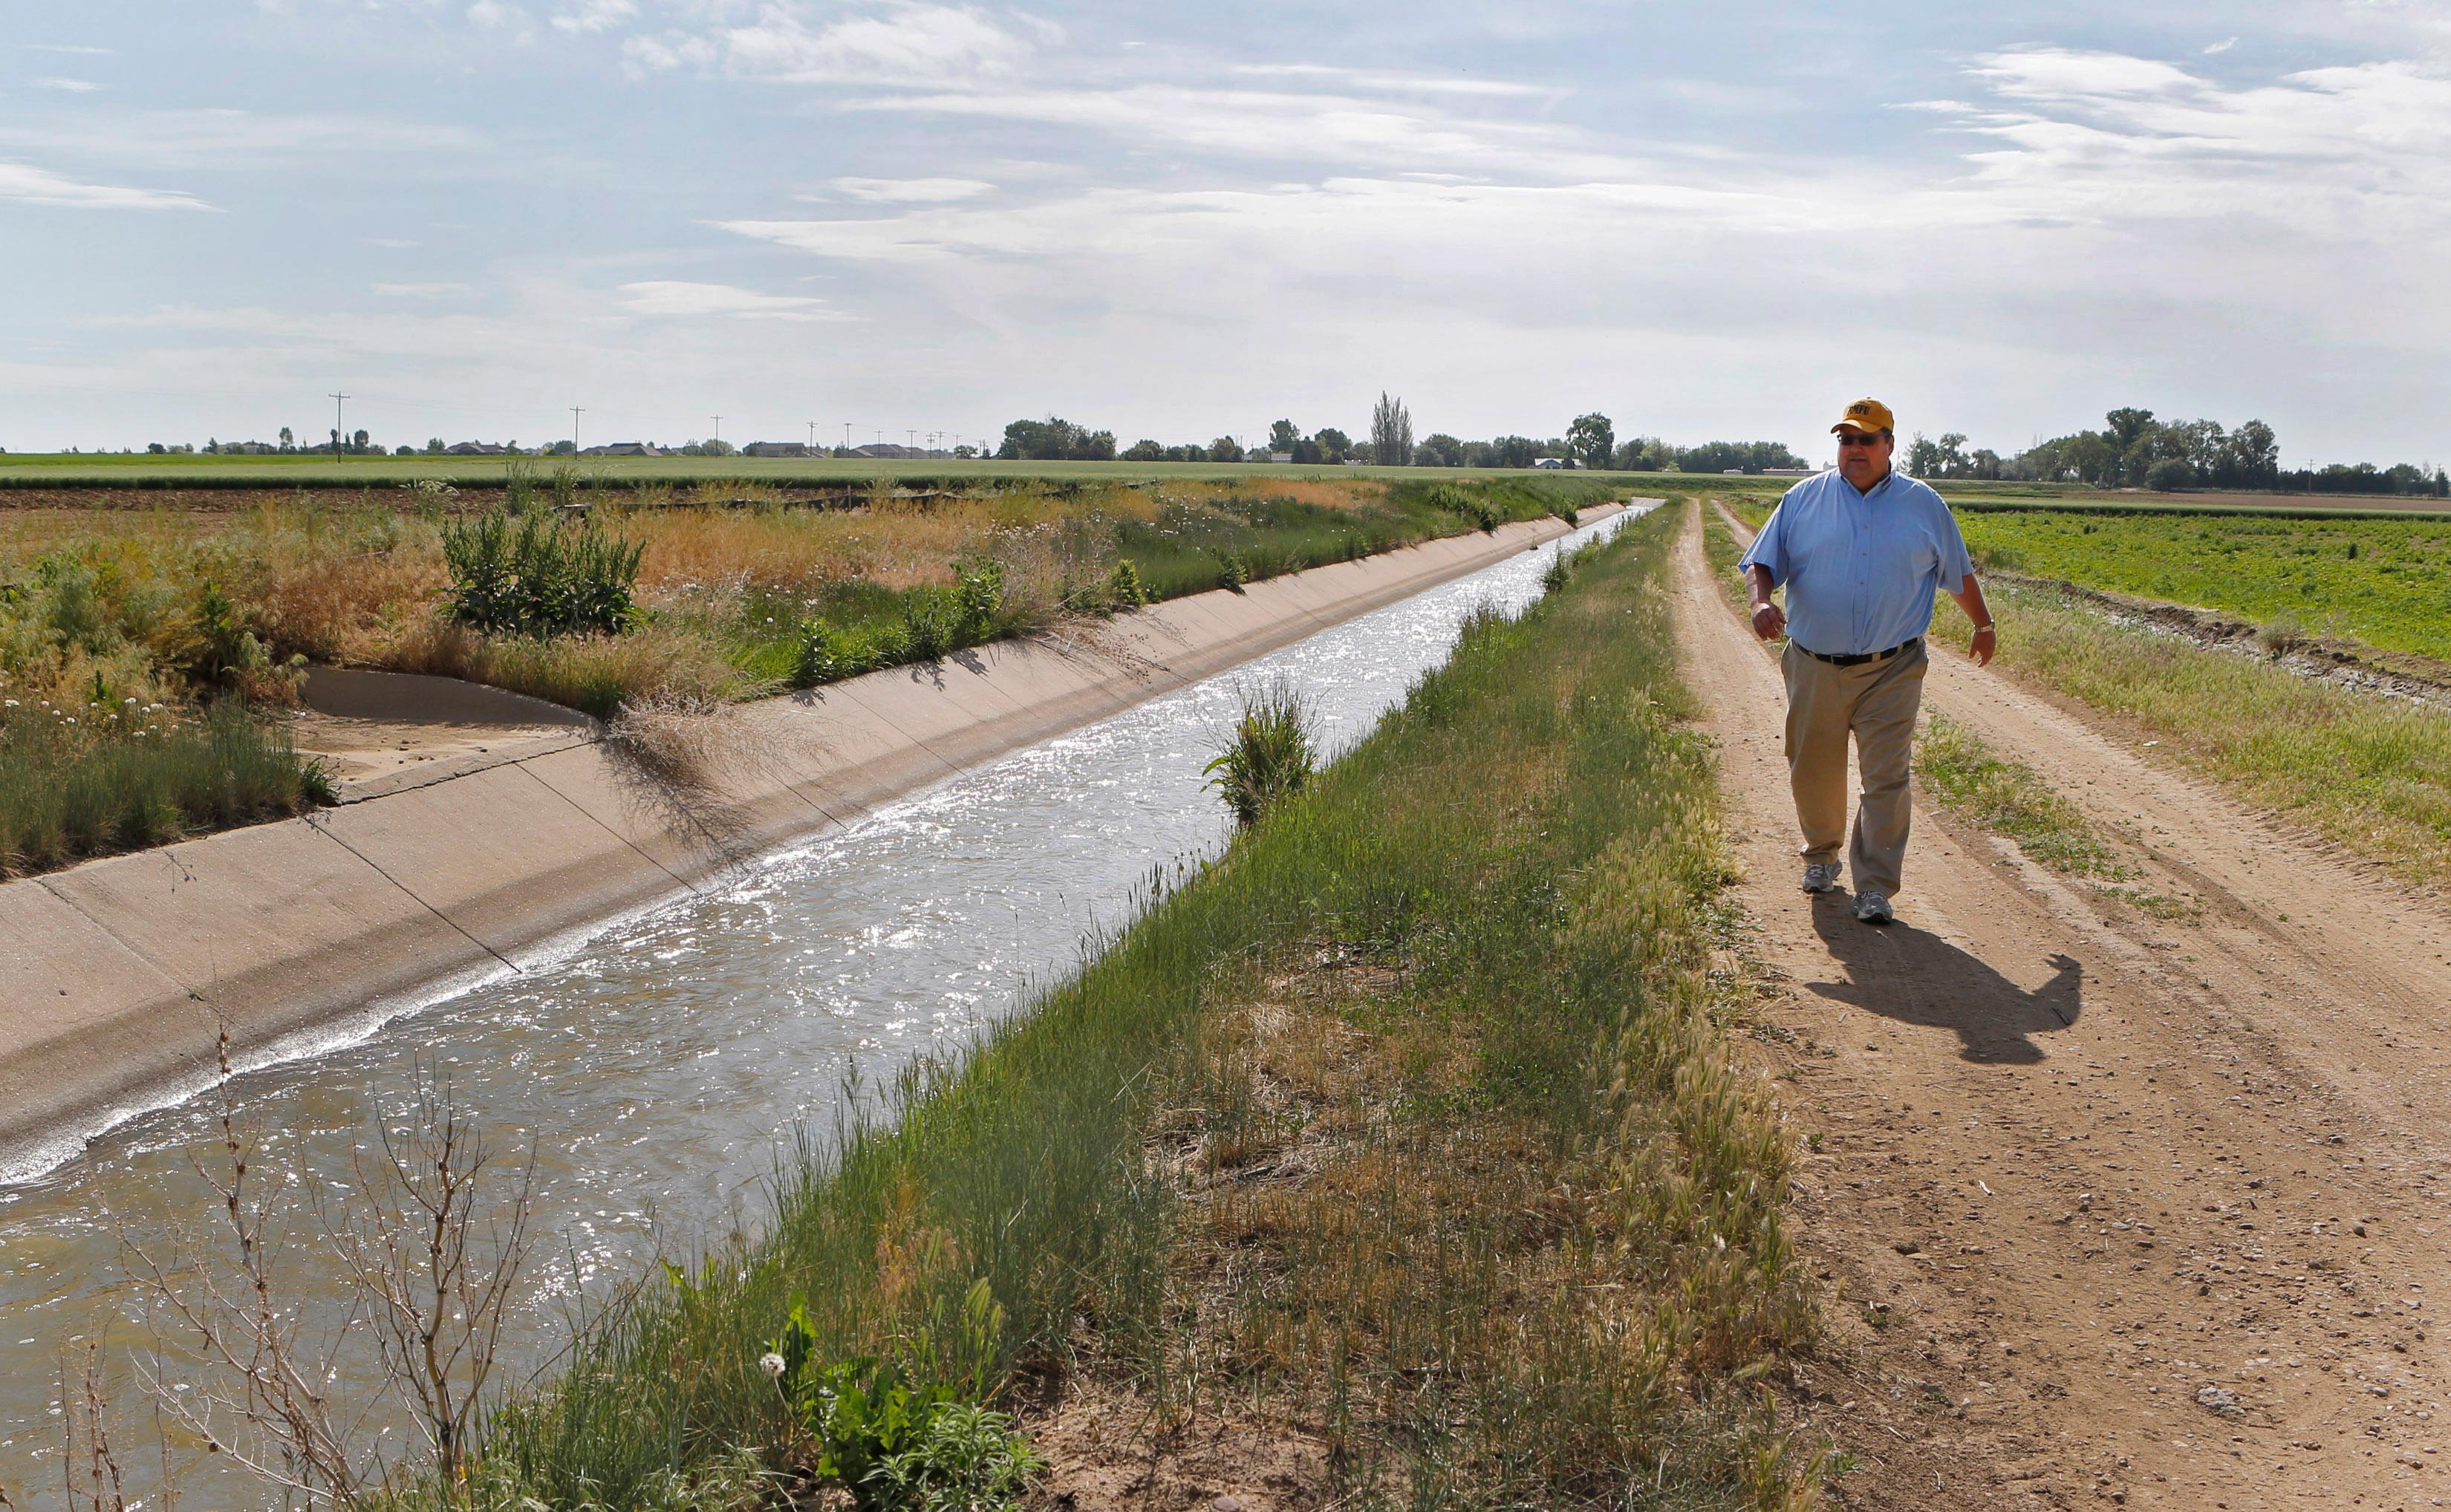 Photo: Irrigation ditch in Greeley (AP Photo)